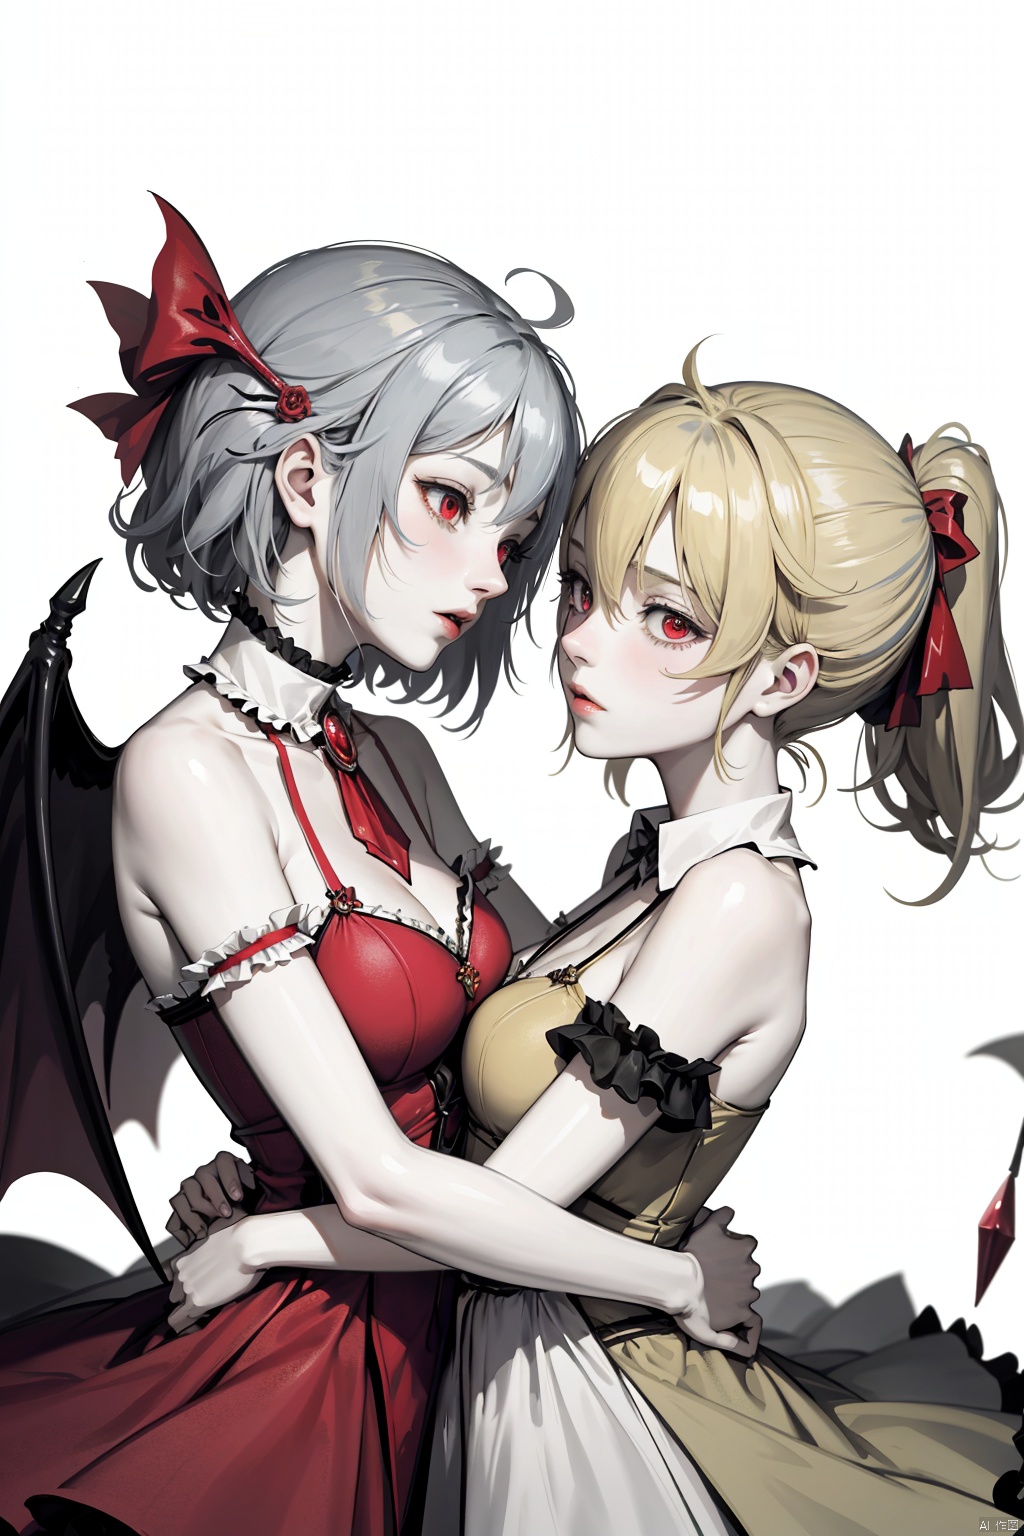 2girls,One has golden hair and the other has blue hair, Pure white background, Flandre Scarlet and Remilia Scarlet Embrace together